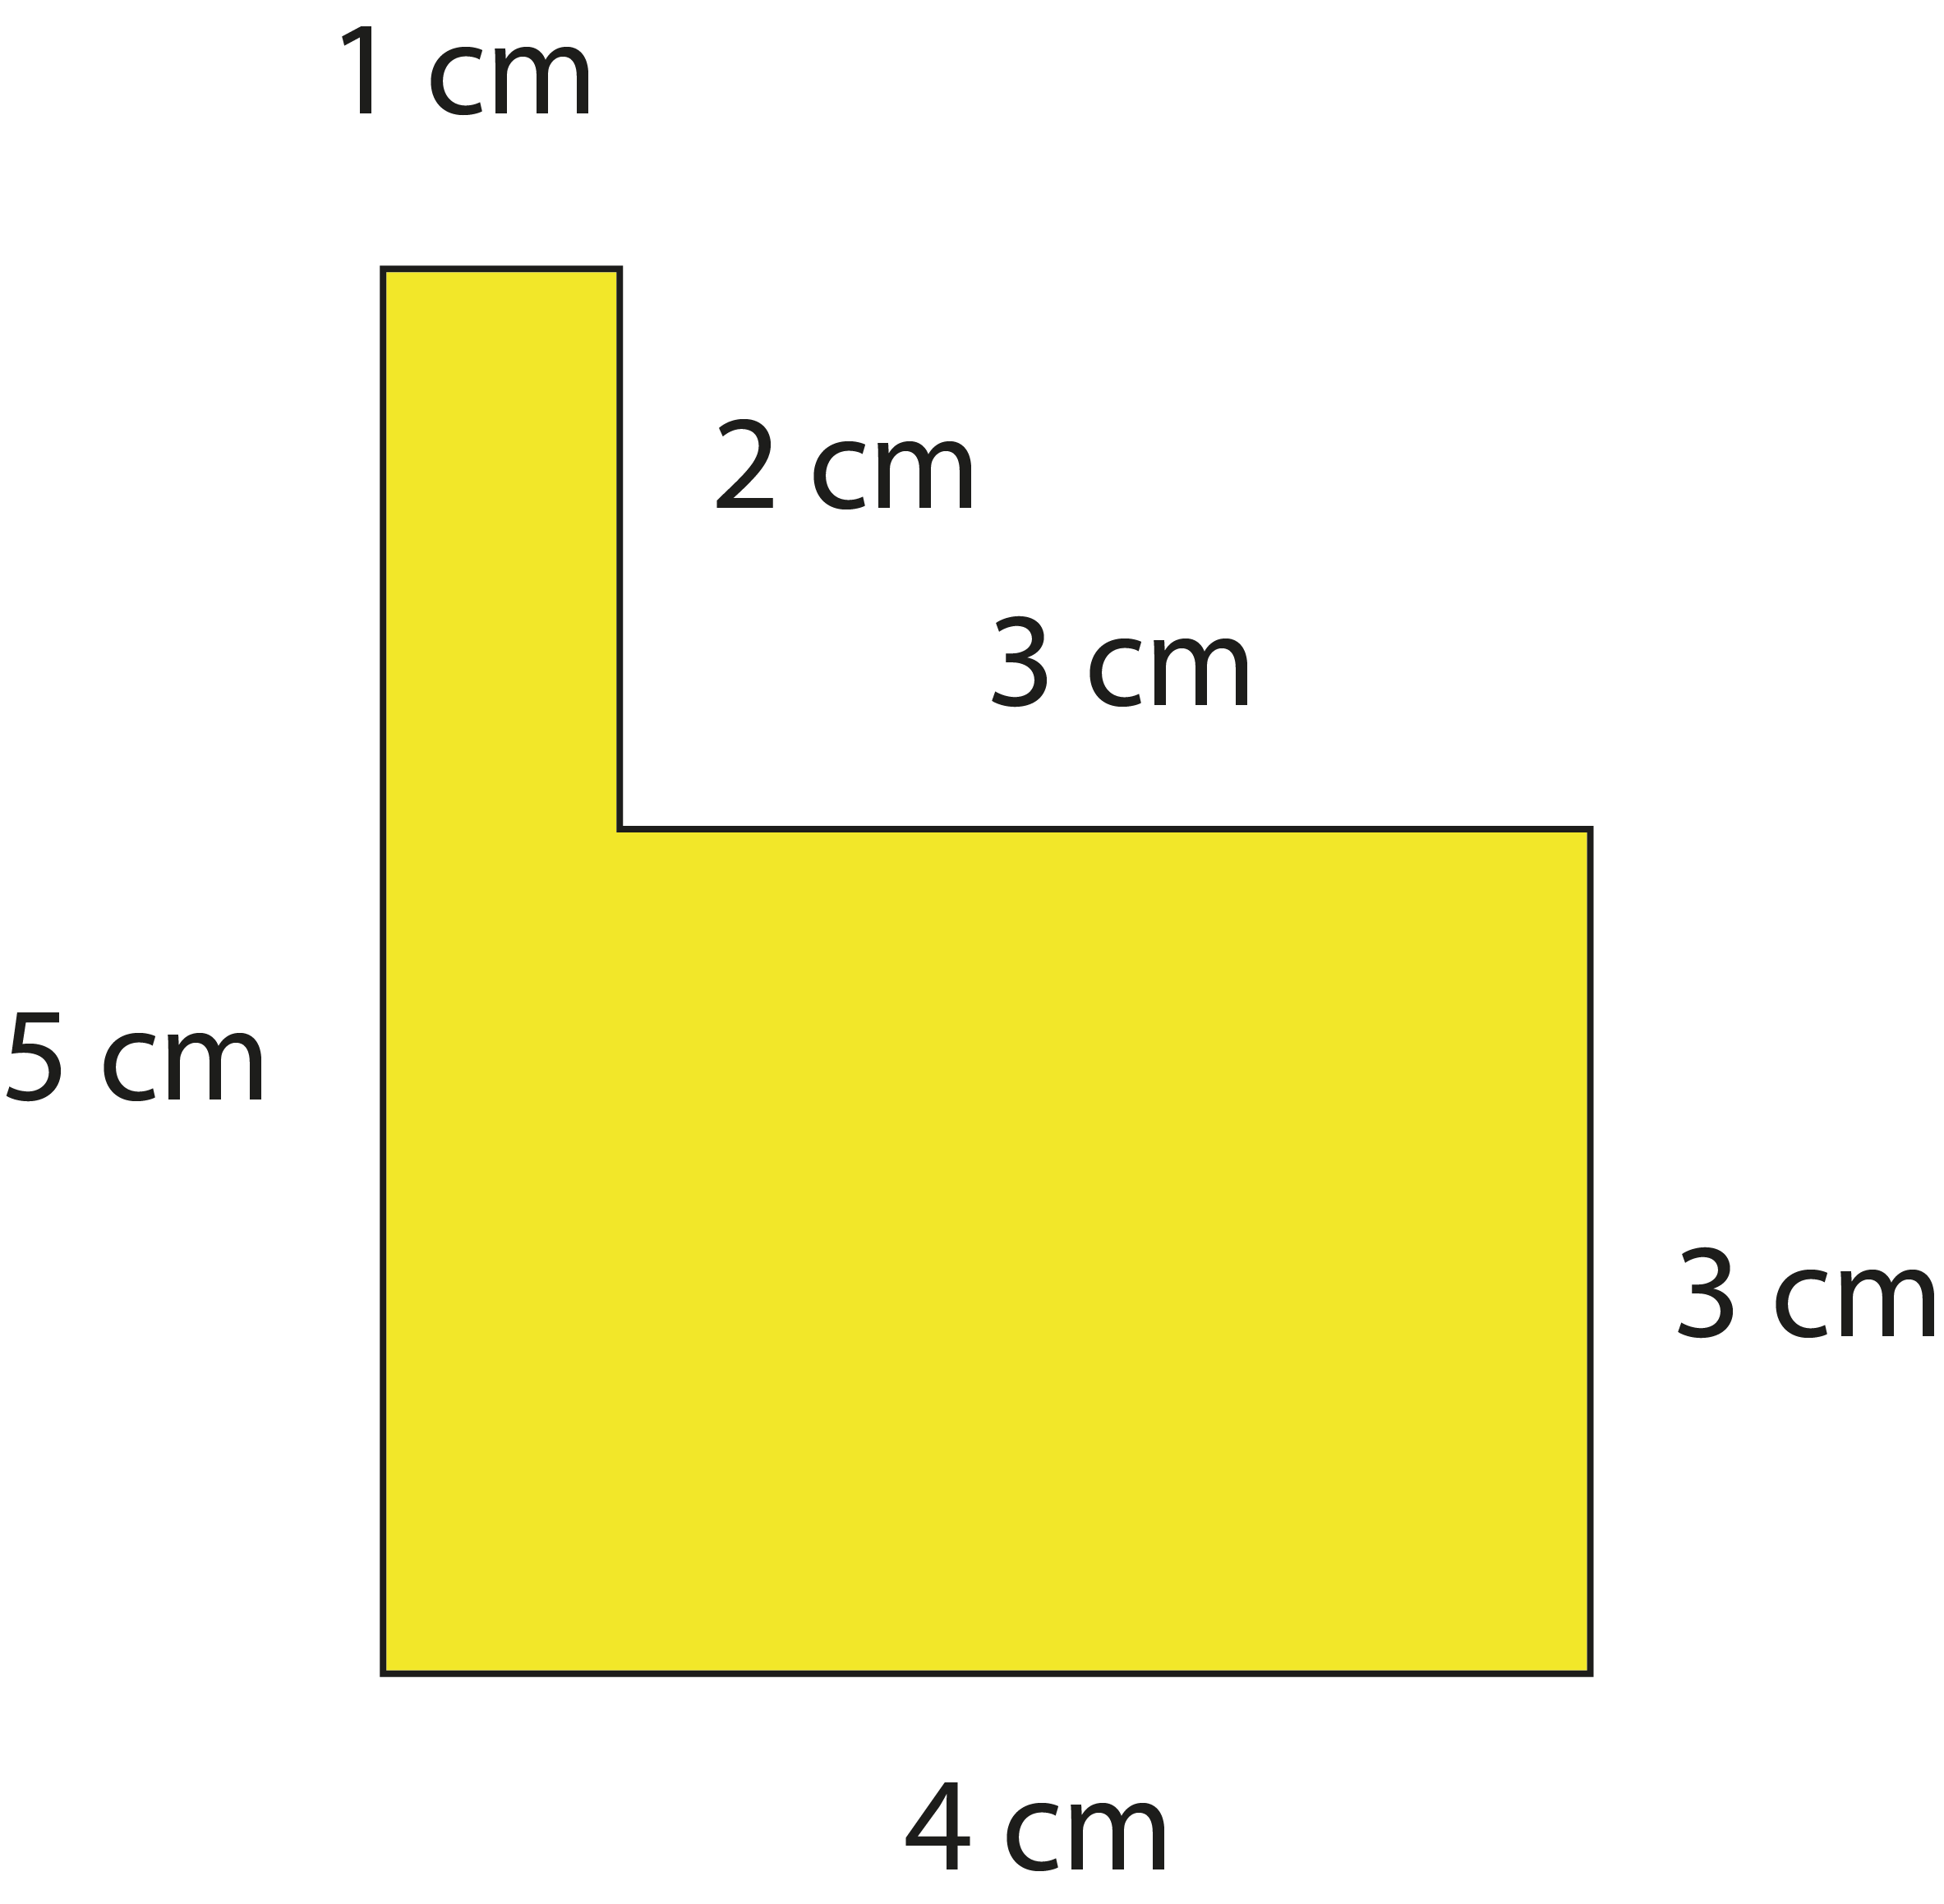 A figure to find the perimeter